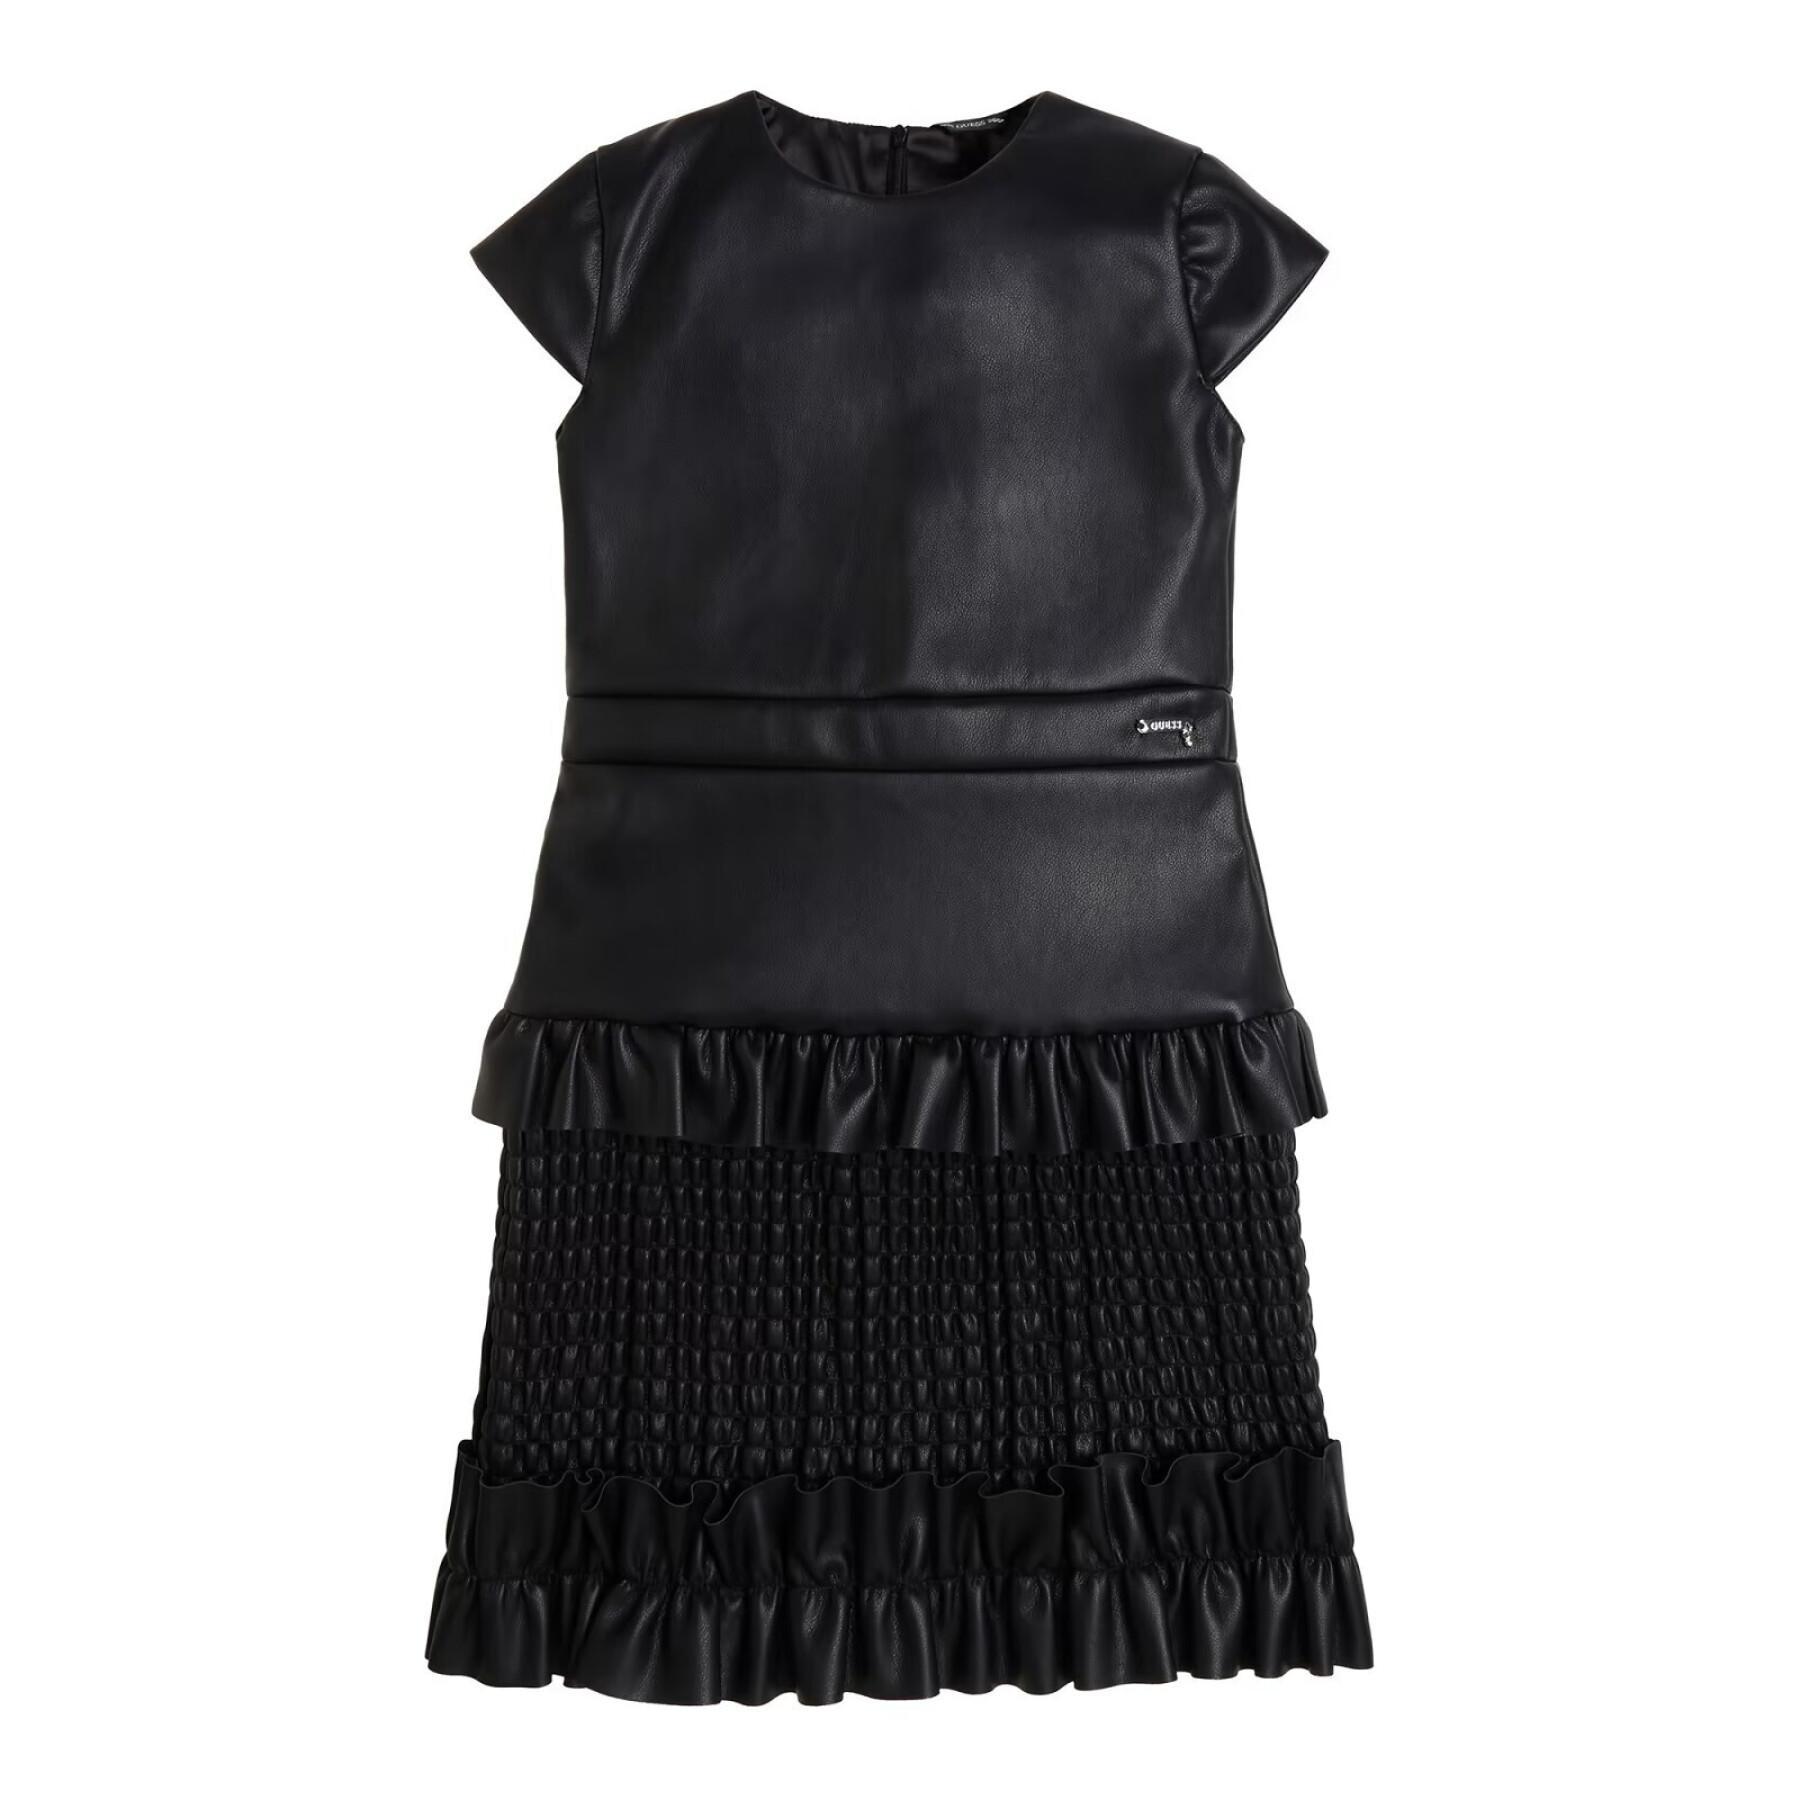 Imitation leather dress for girls Guess